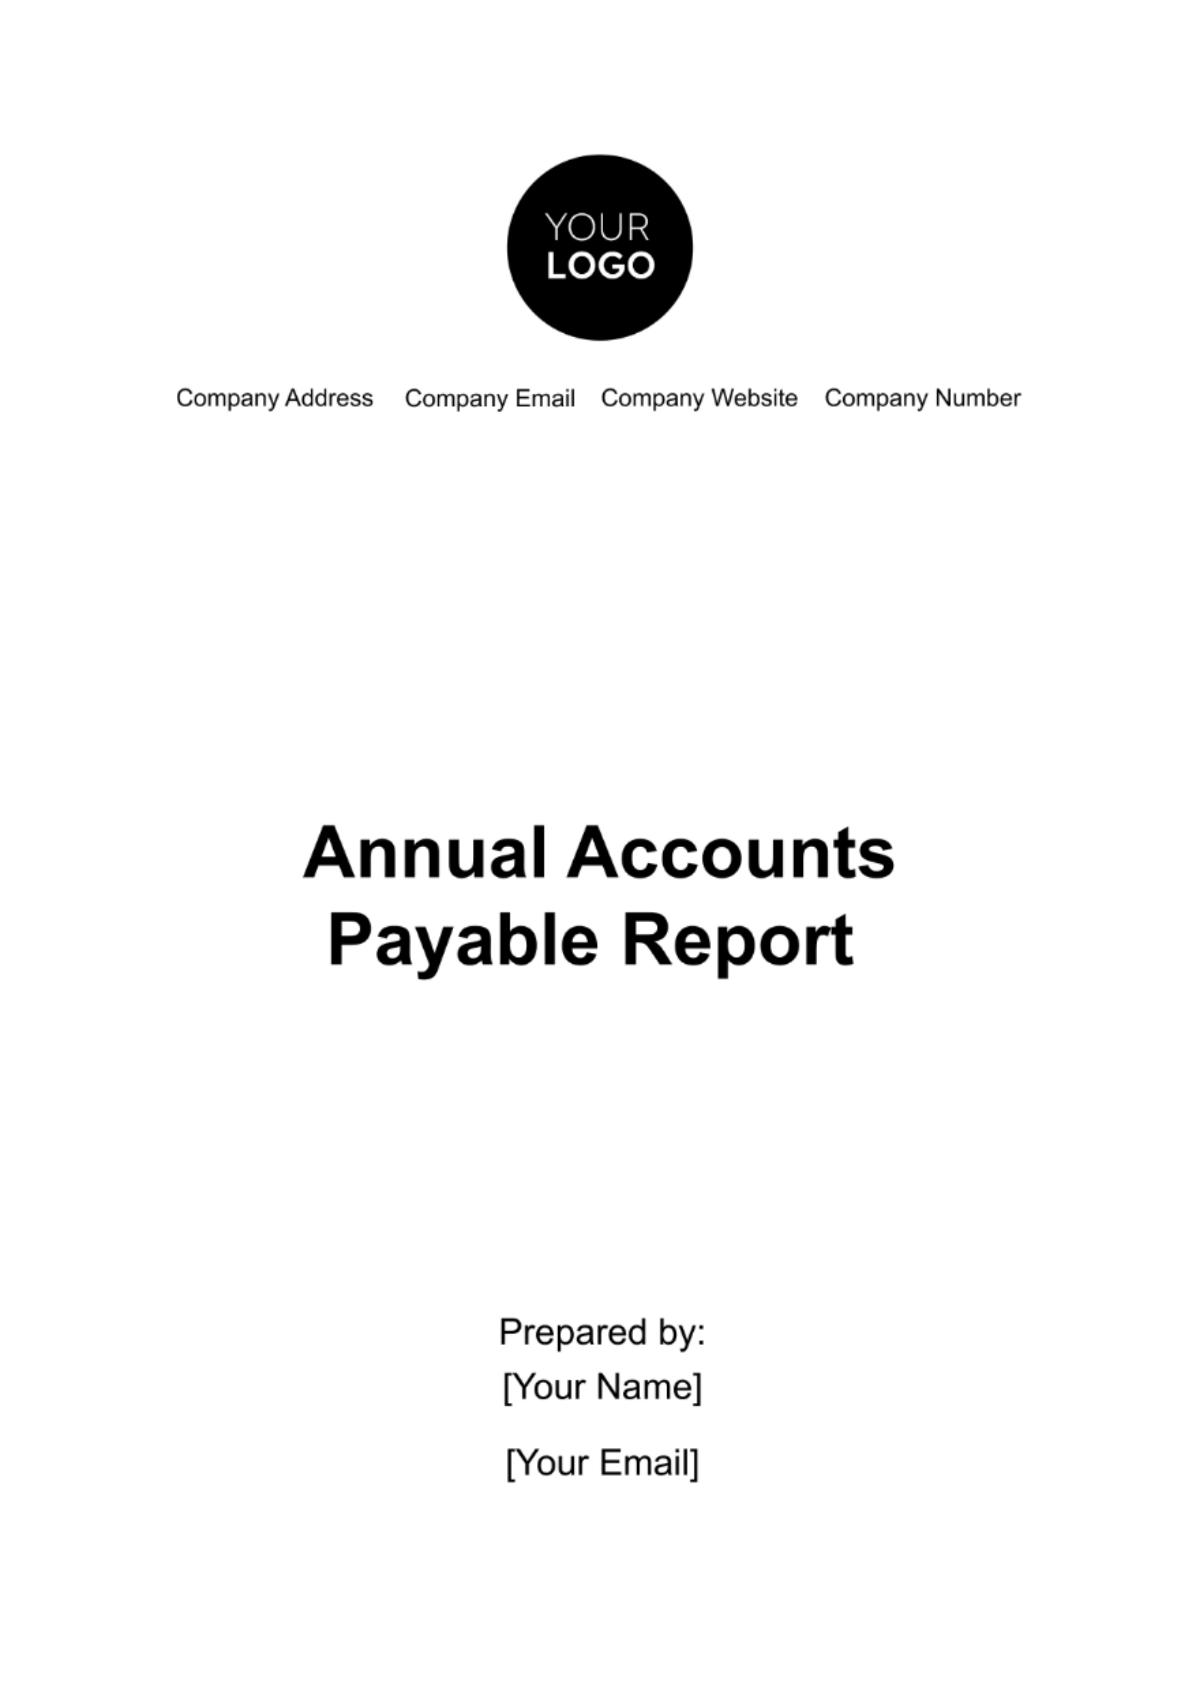 Annual Accounts Payable Report Template